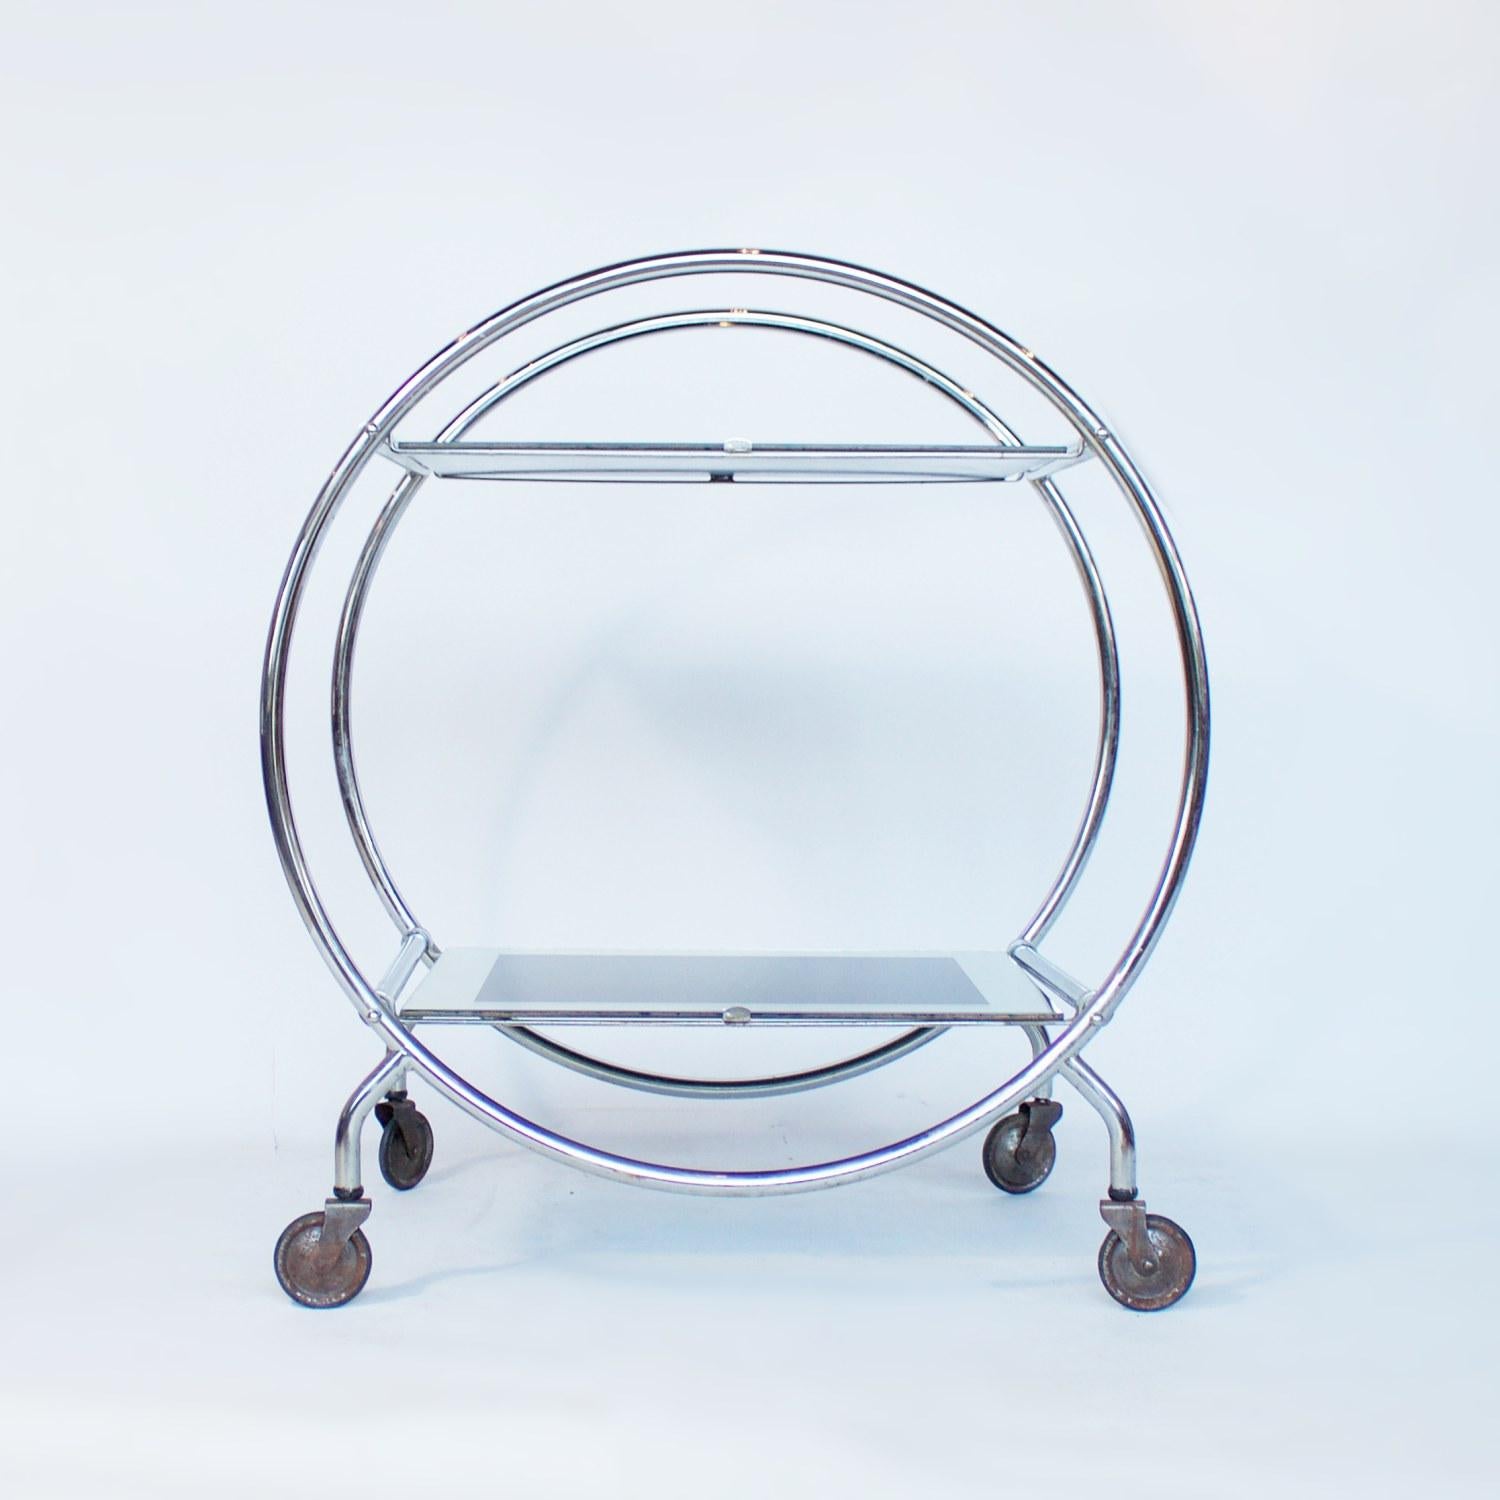 An Art Deco chrome and mirrored glass drinks trolley. Hooped frame with two rectangular shelves. Original castors and mirrored shelves. 

Dimensions: H 77cm, W 68cm, D 45cm 

Origin: English

Date: circa 1935

Item number: 2101212.